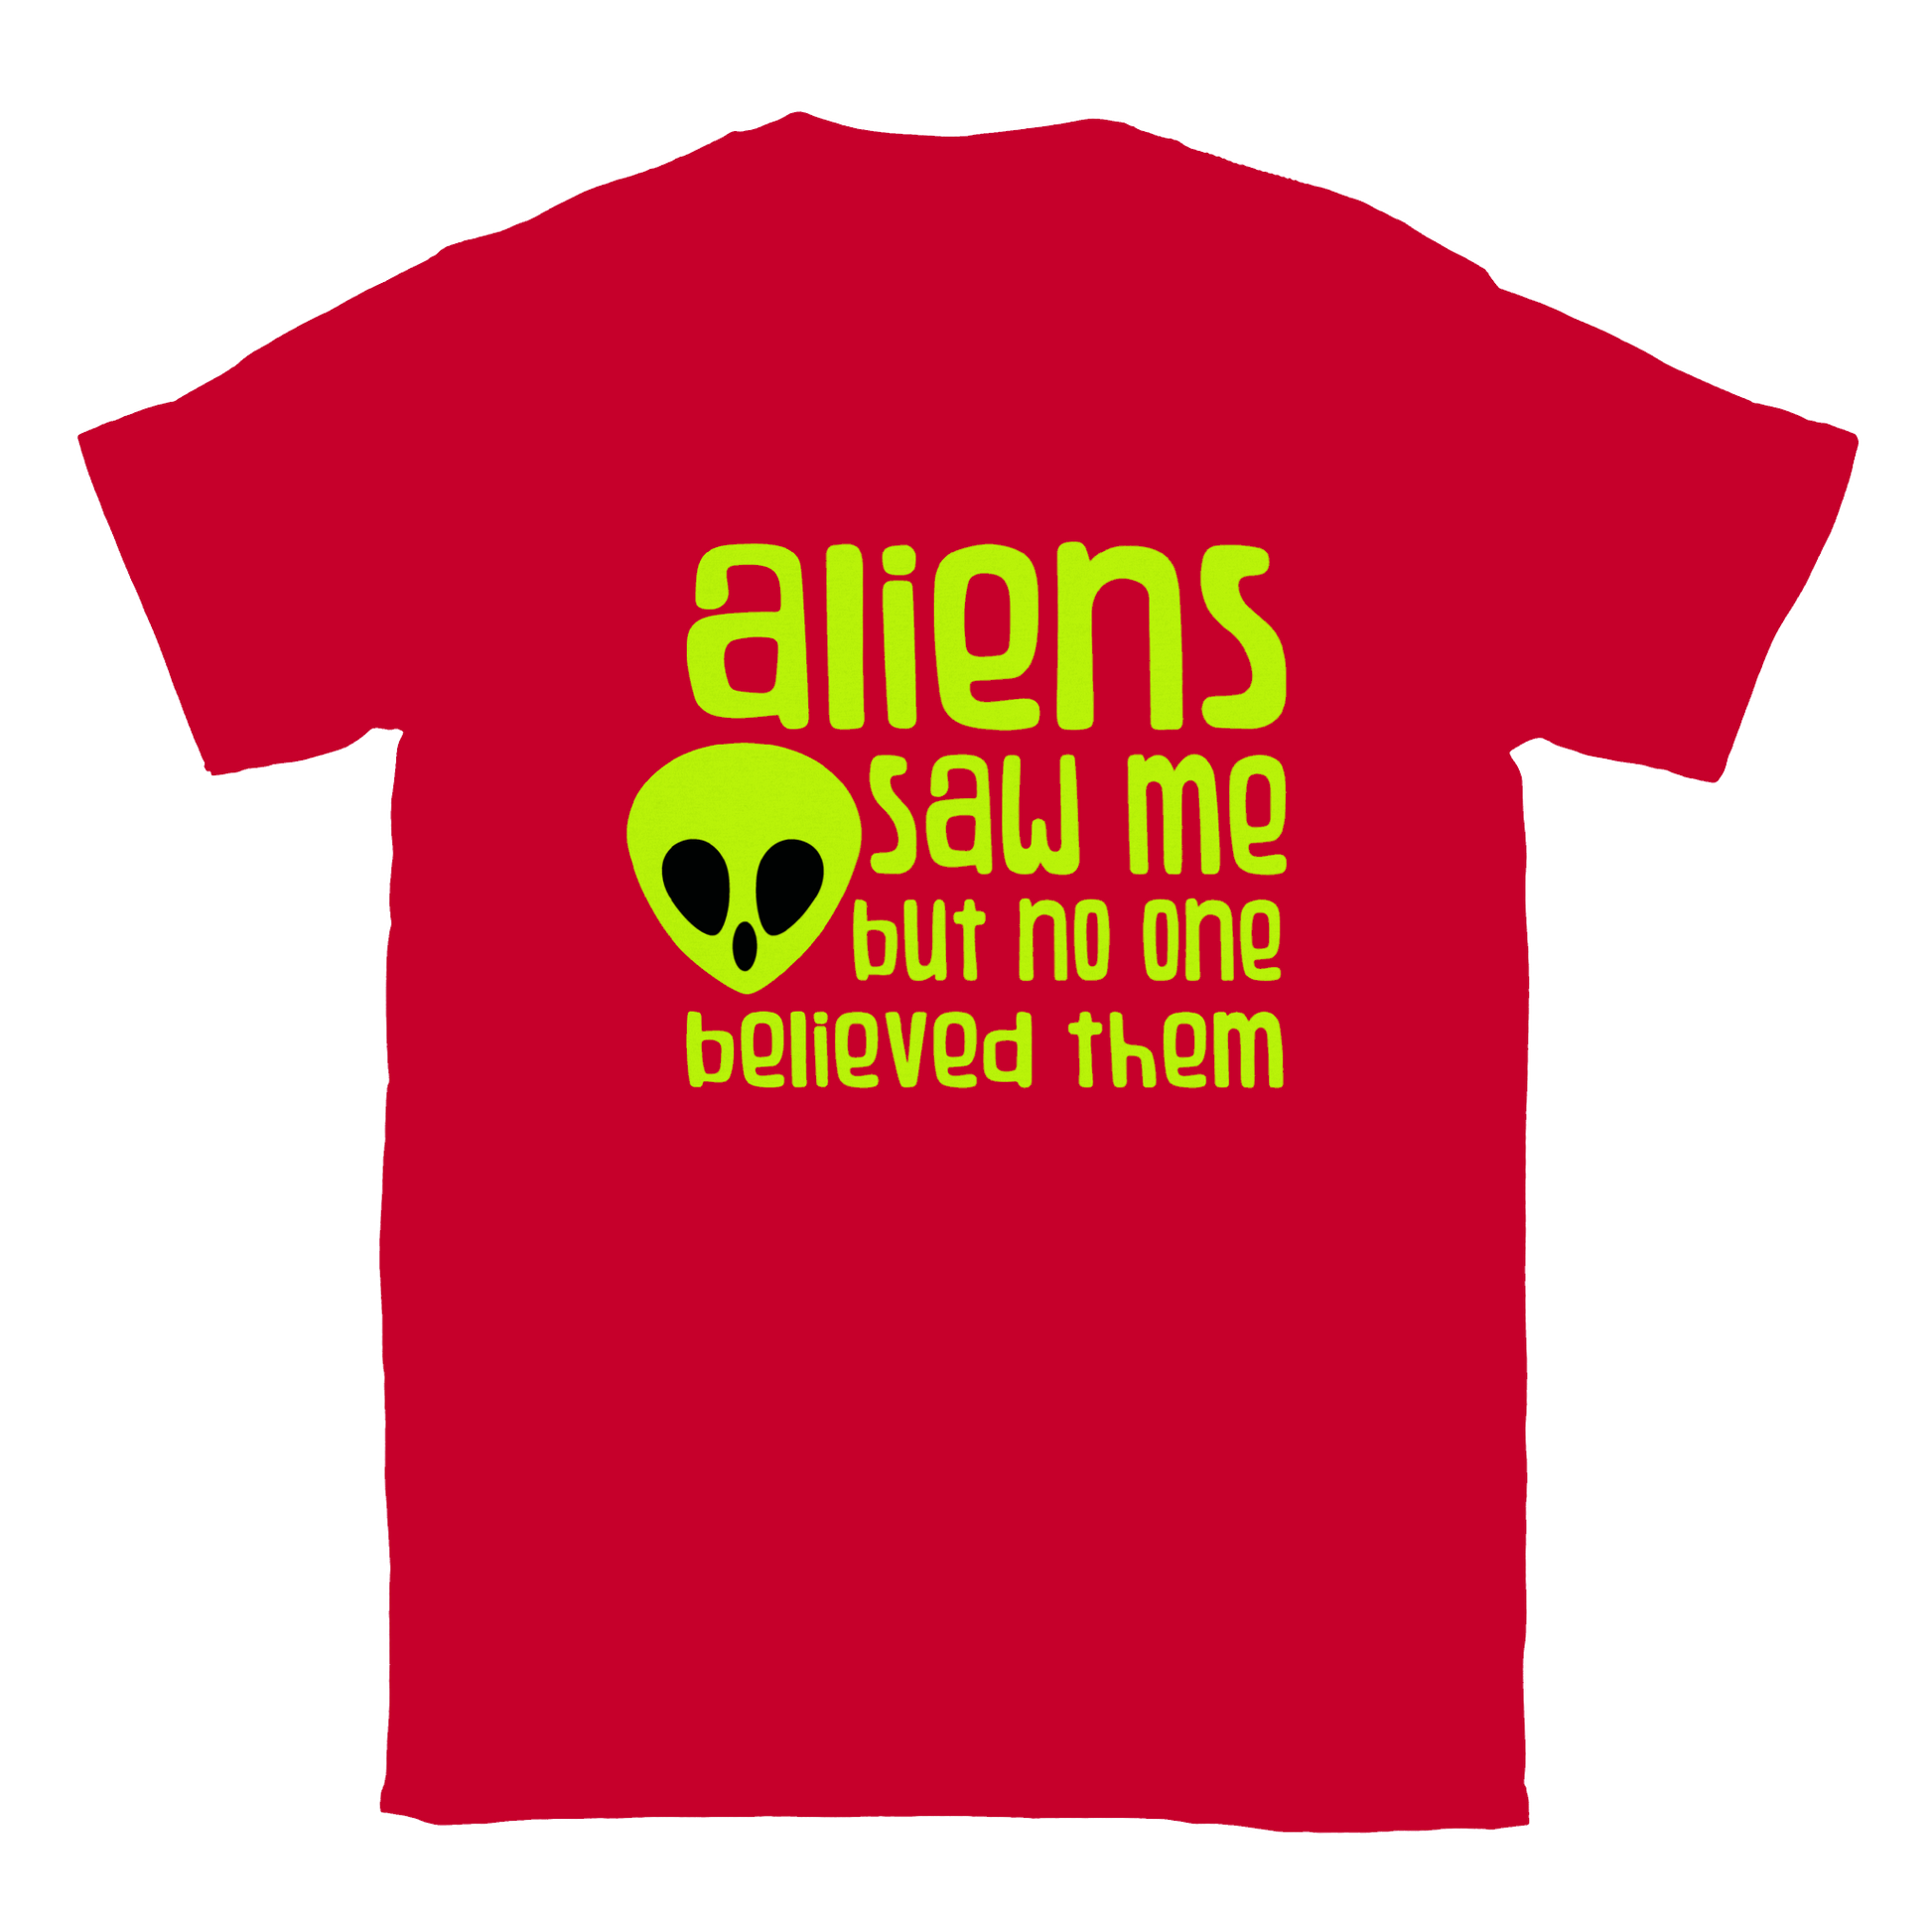 Aliens Saw Me But No One Believed Them - Classic Unisex Crewneck T-shirt - Mister Snarky's